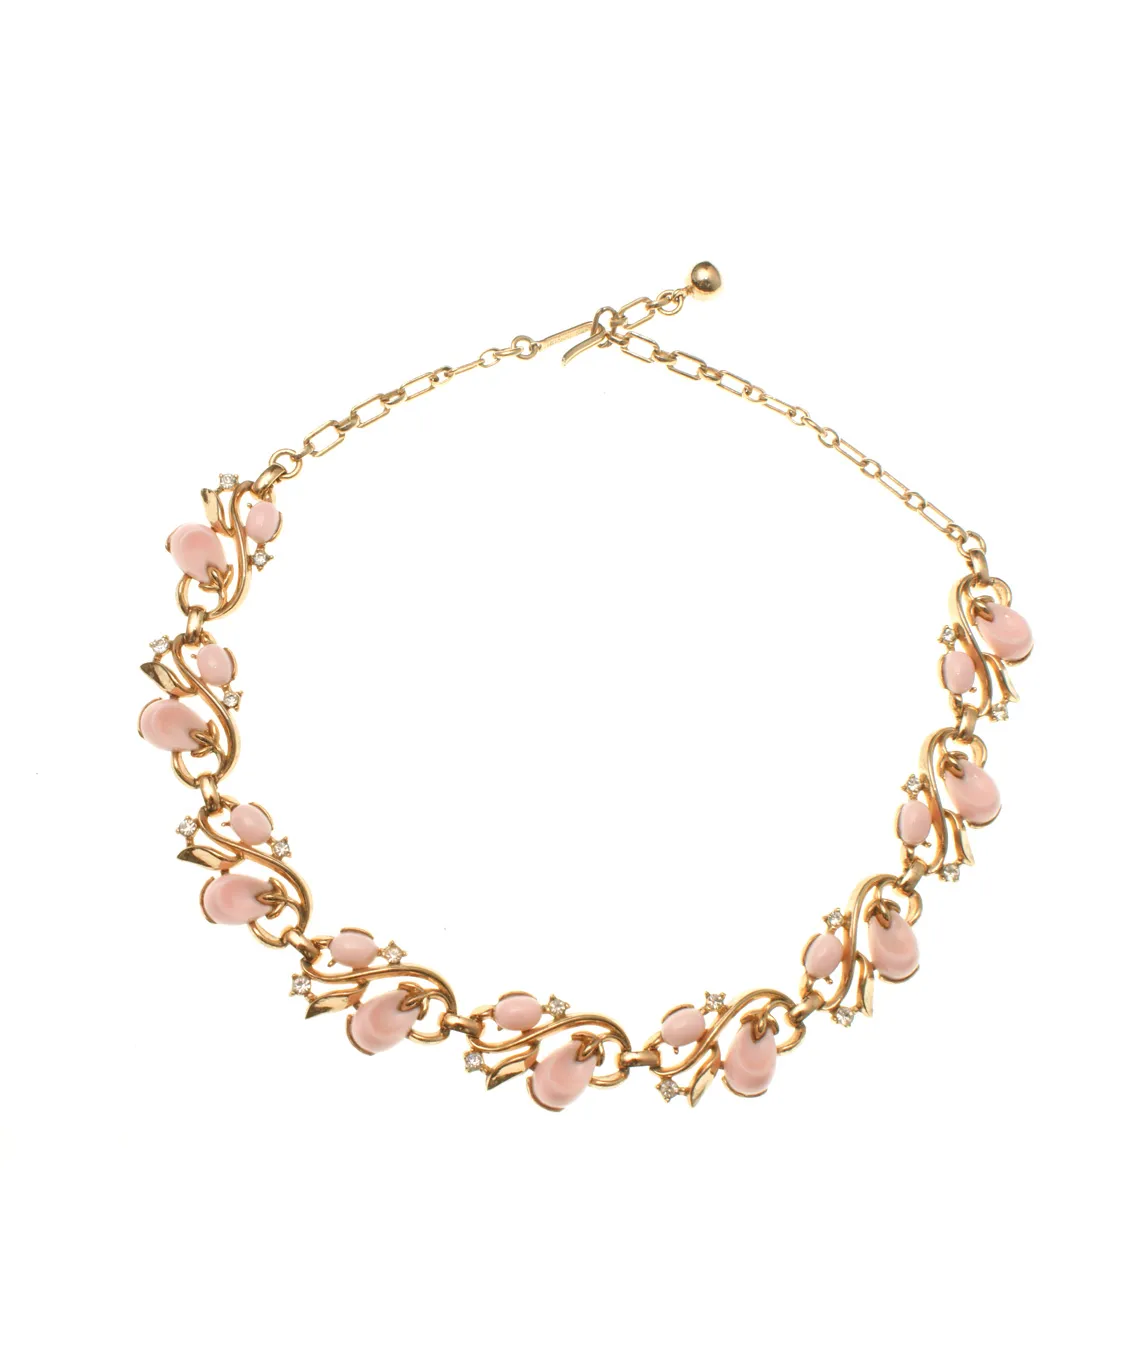 Pink and gold Trifari necklace